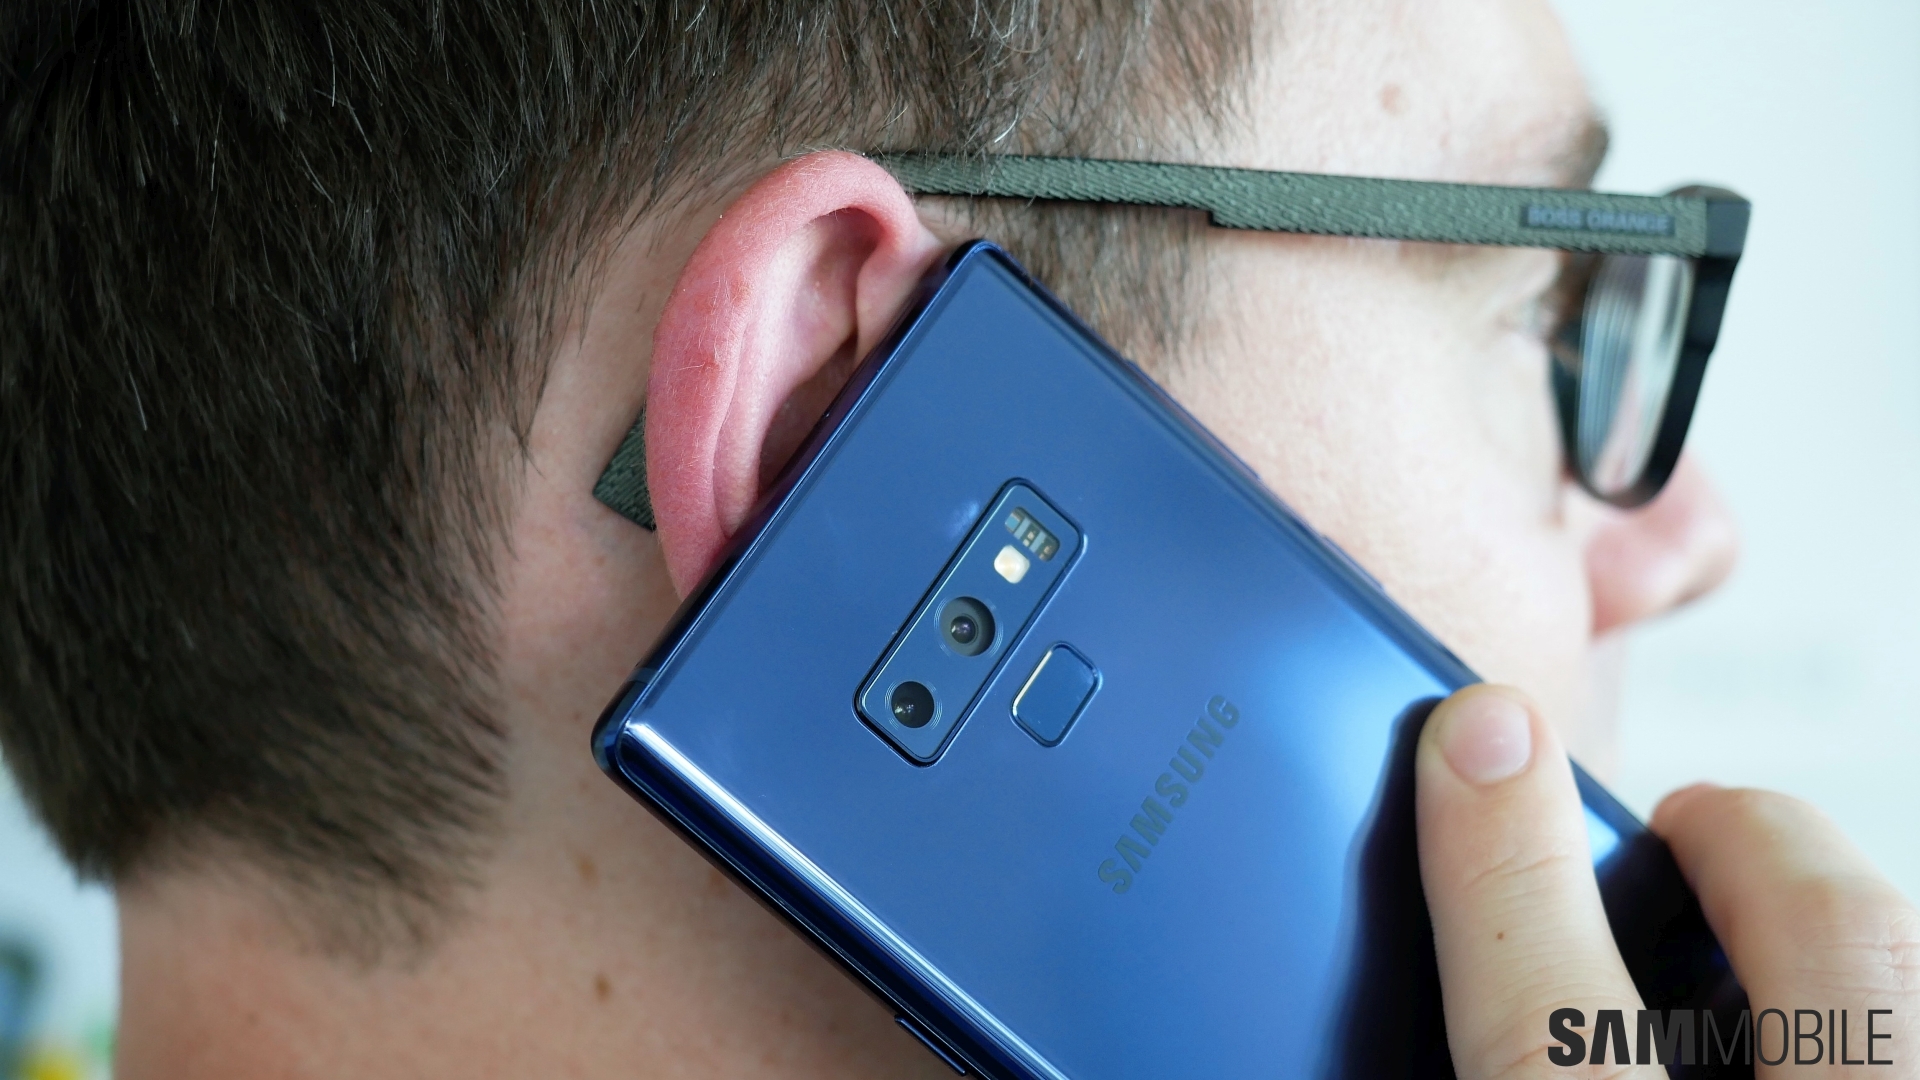 Galaxy Note 10 may feature Sound on Display instead of an earpiece